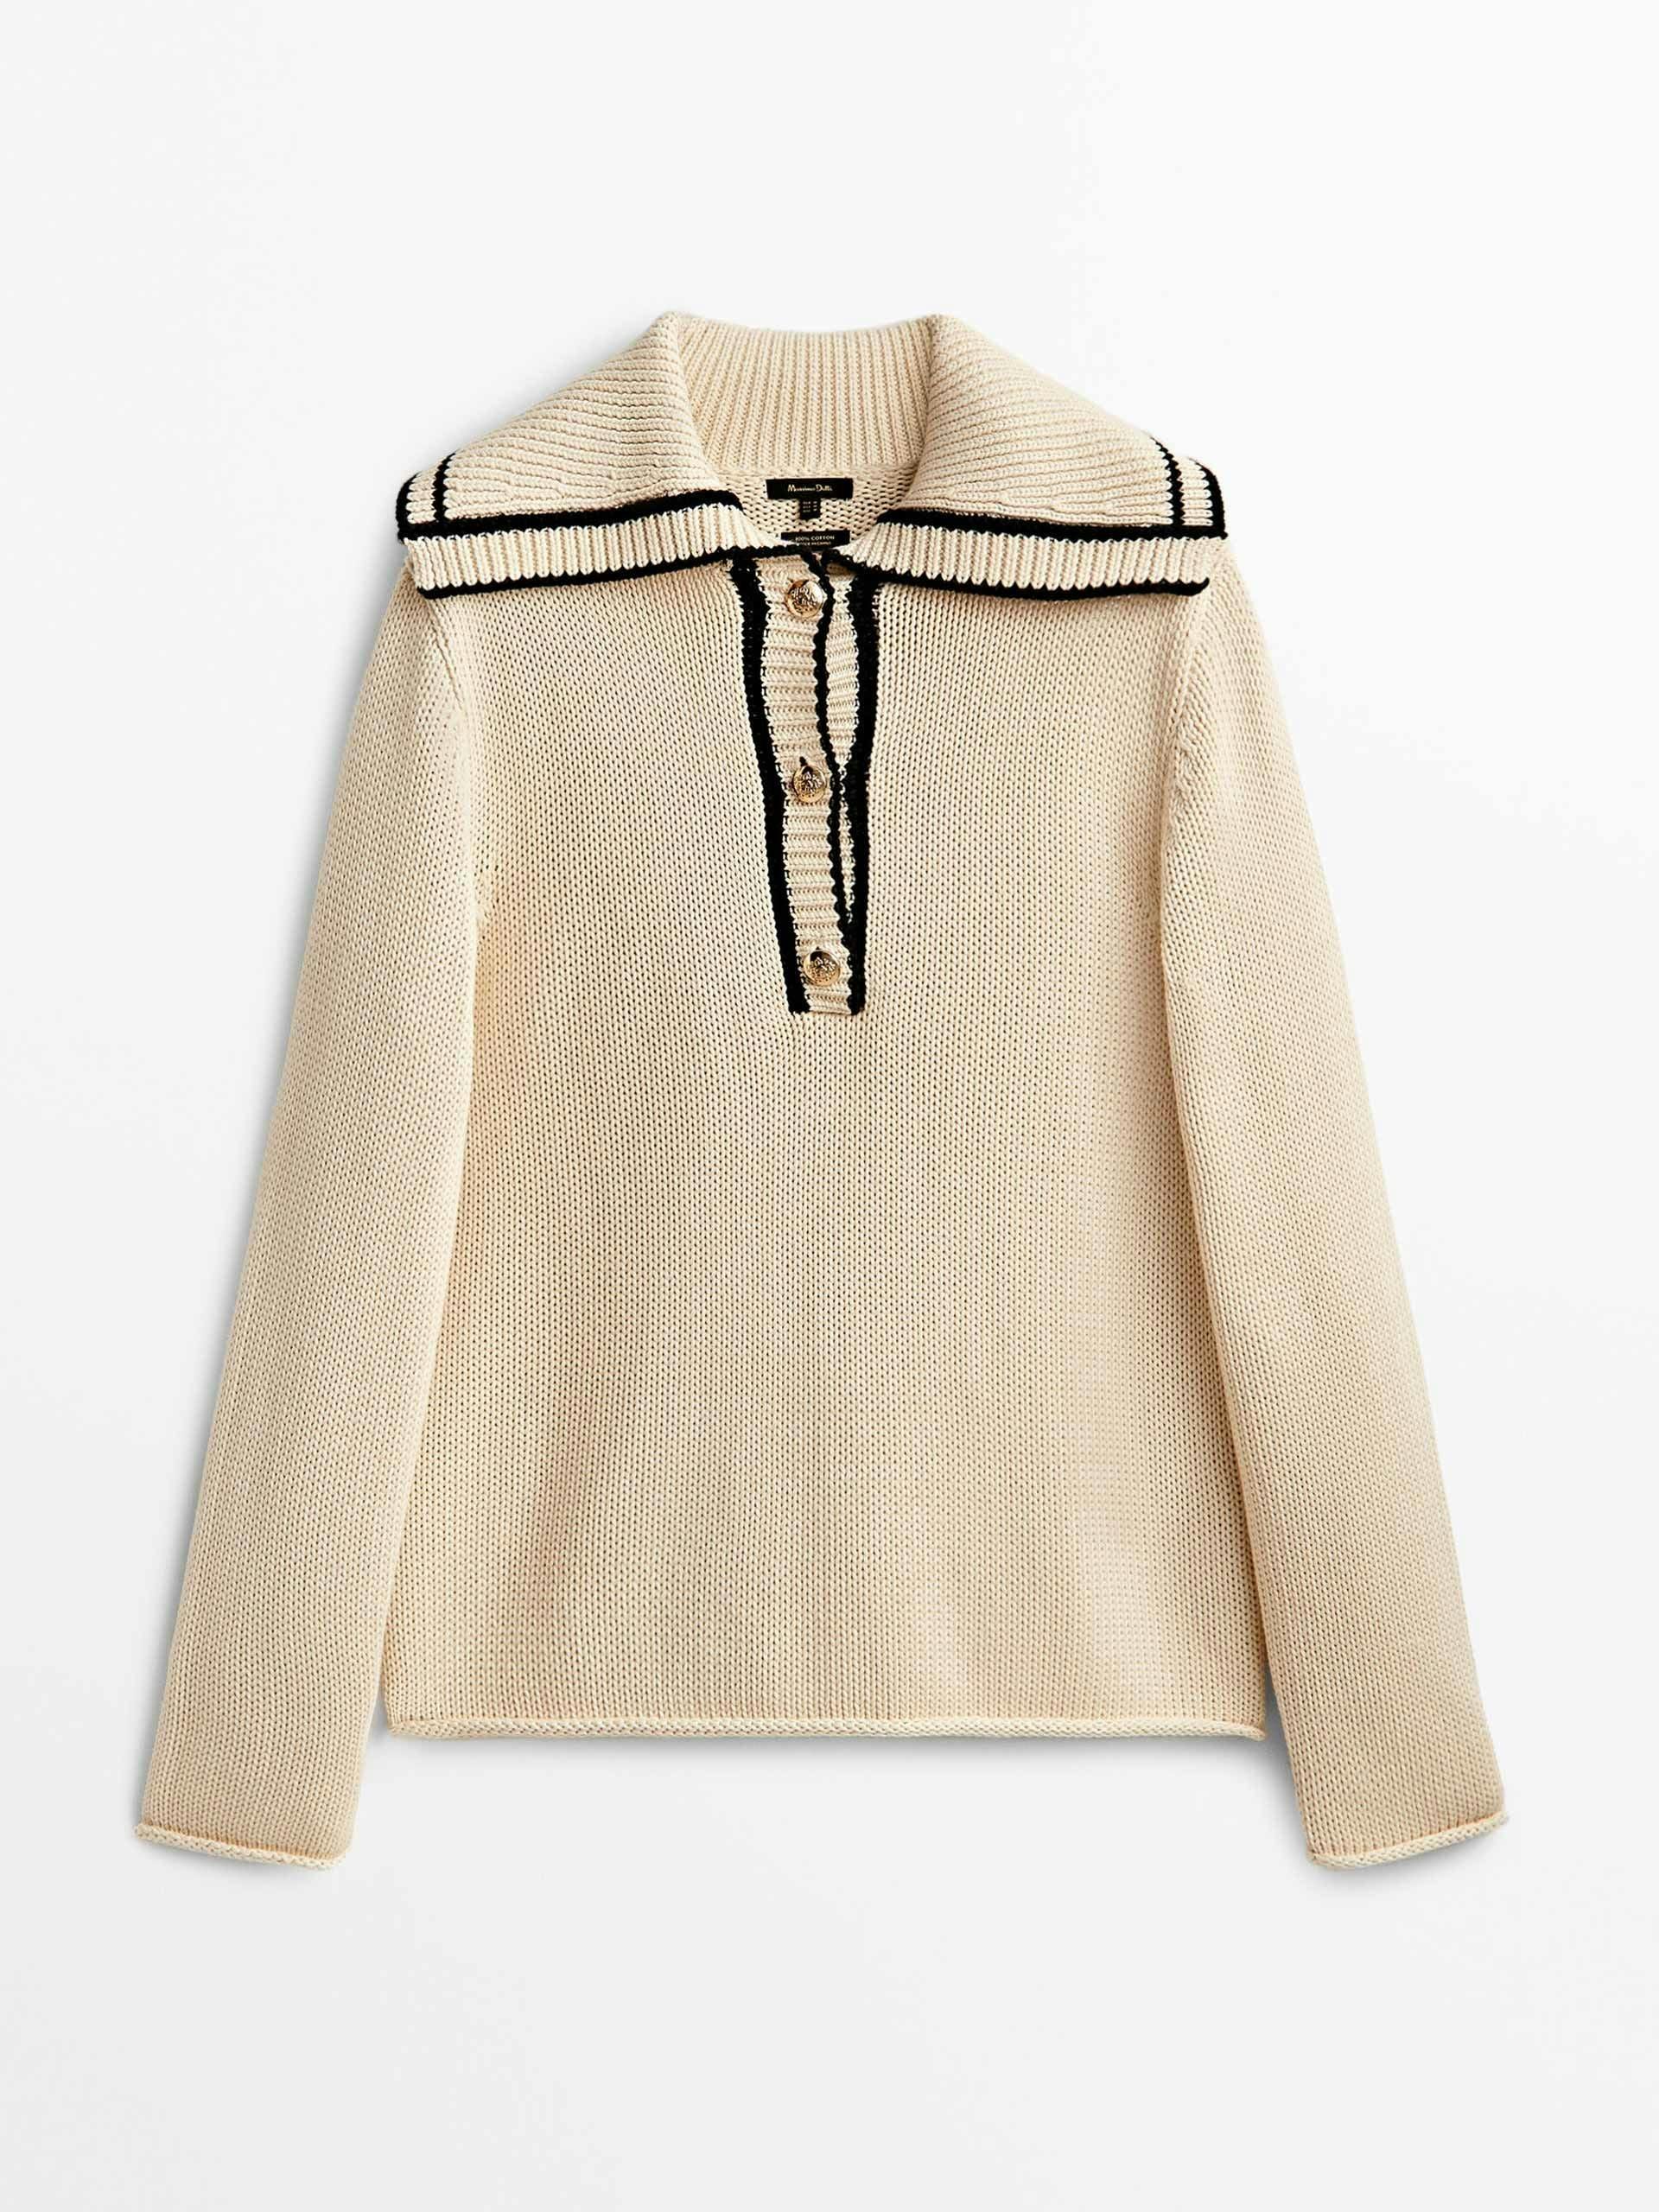 Sweater with contrast neckline and gold-toned buttons